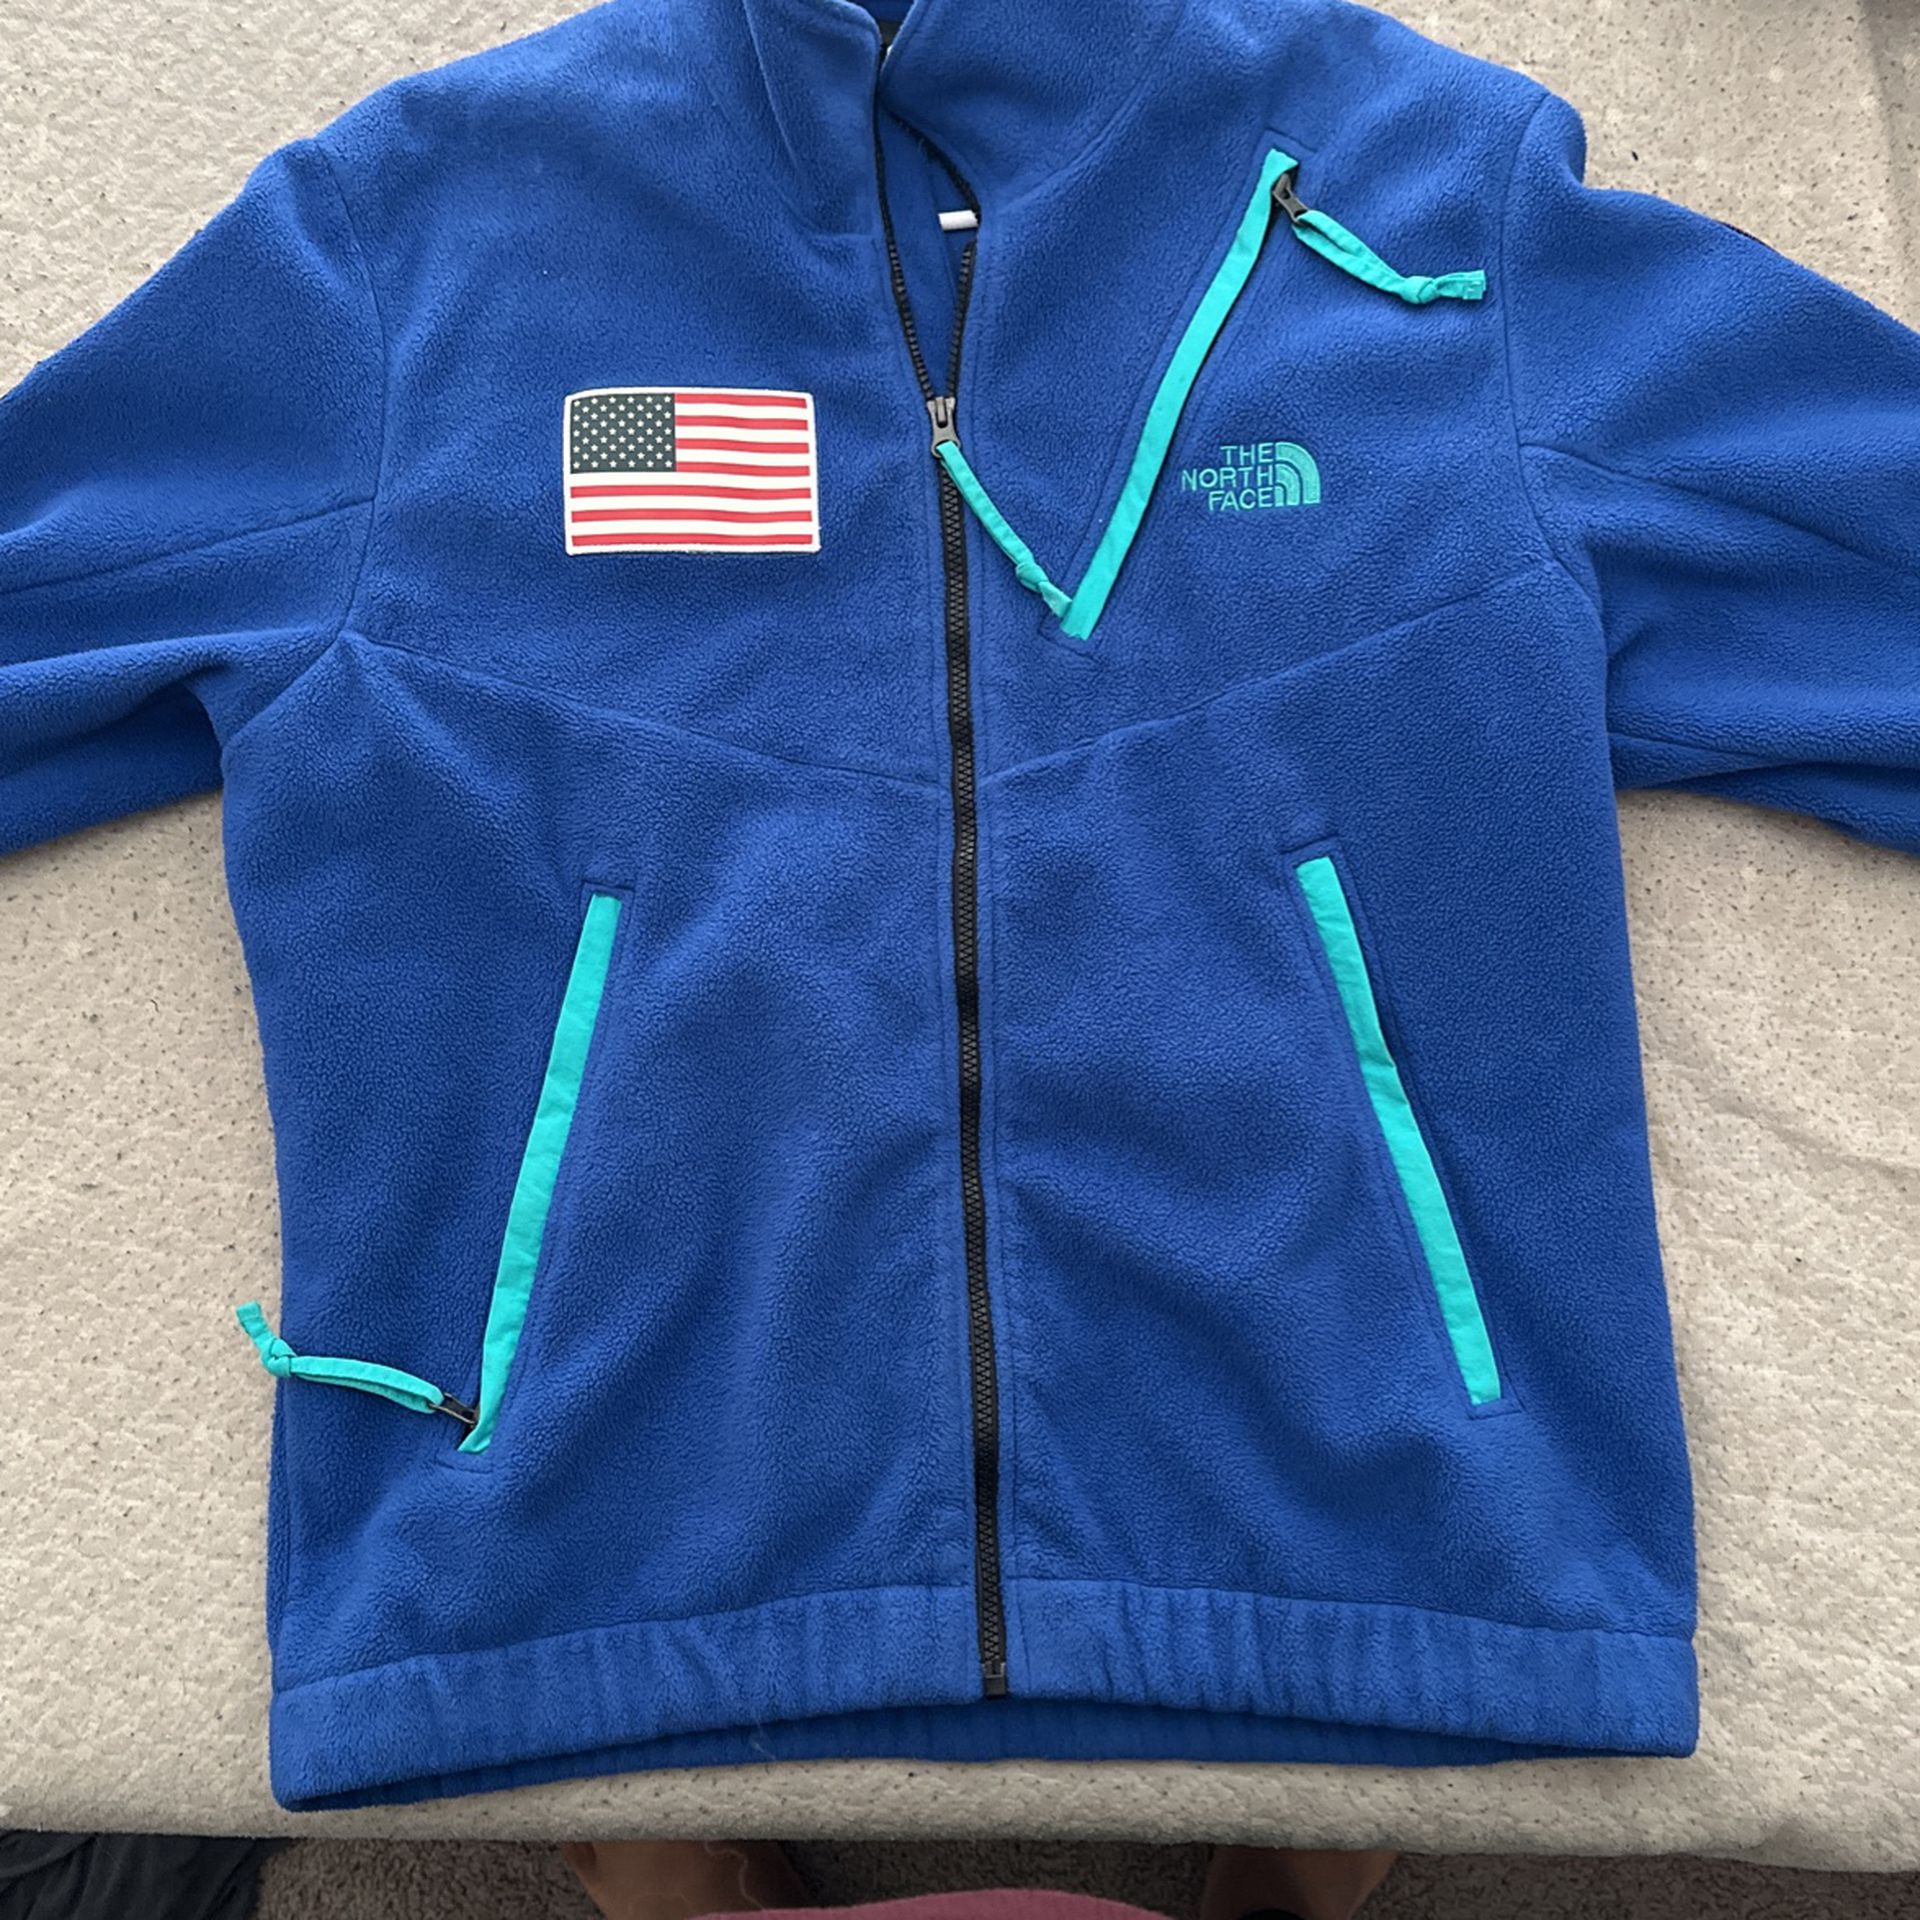 Authentic Supreme X North Face Jacket